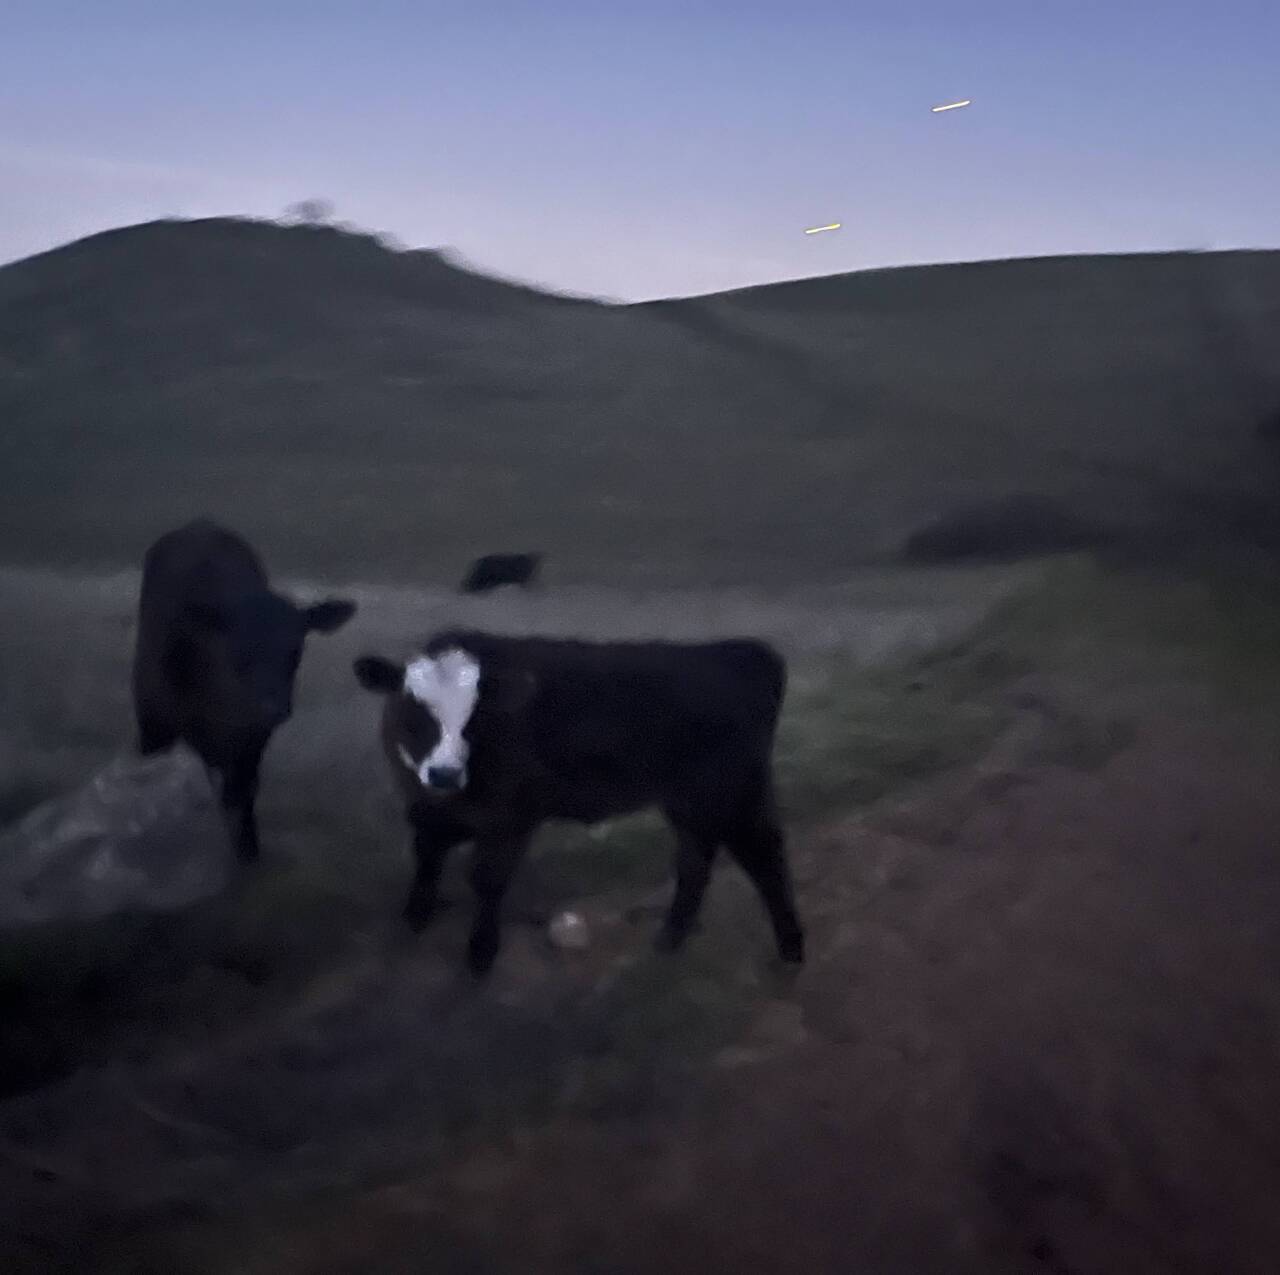 A cow stares at me in the fading light